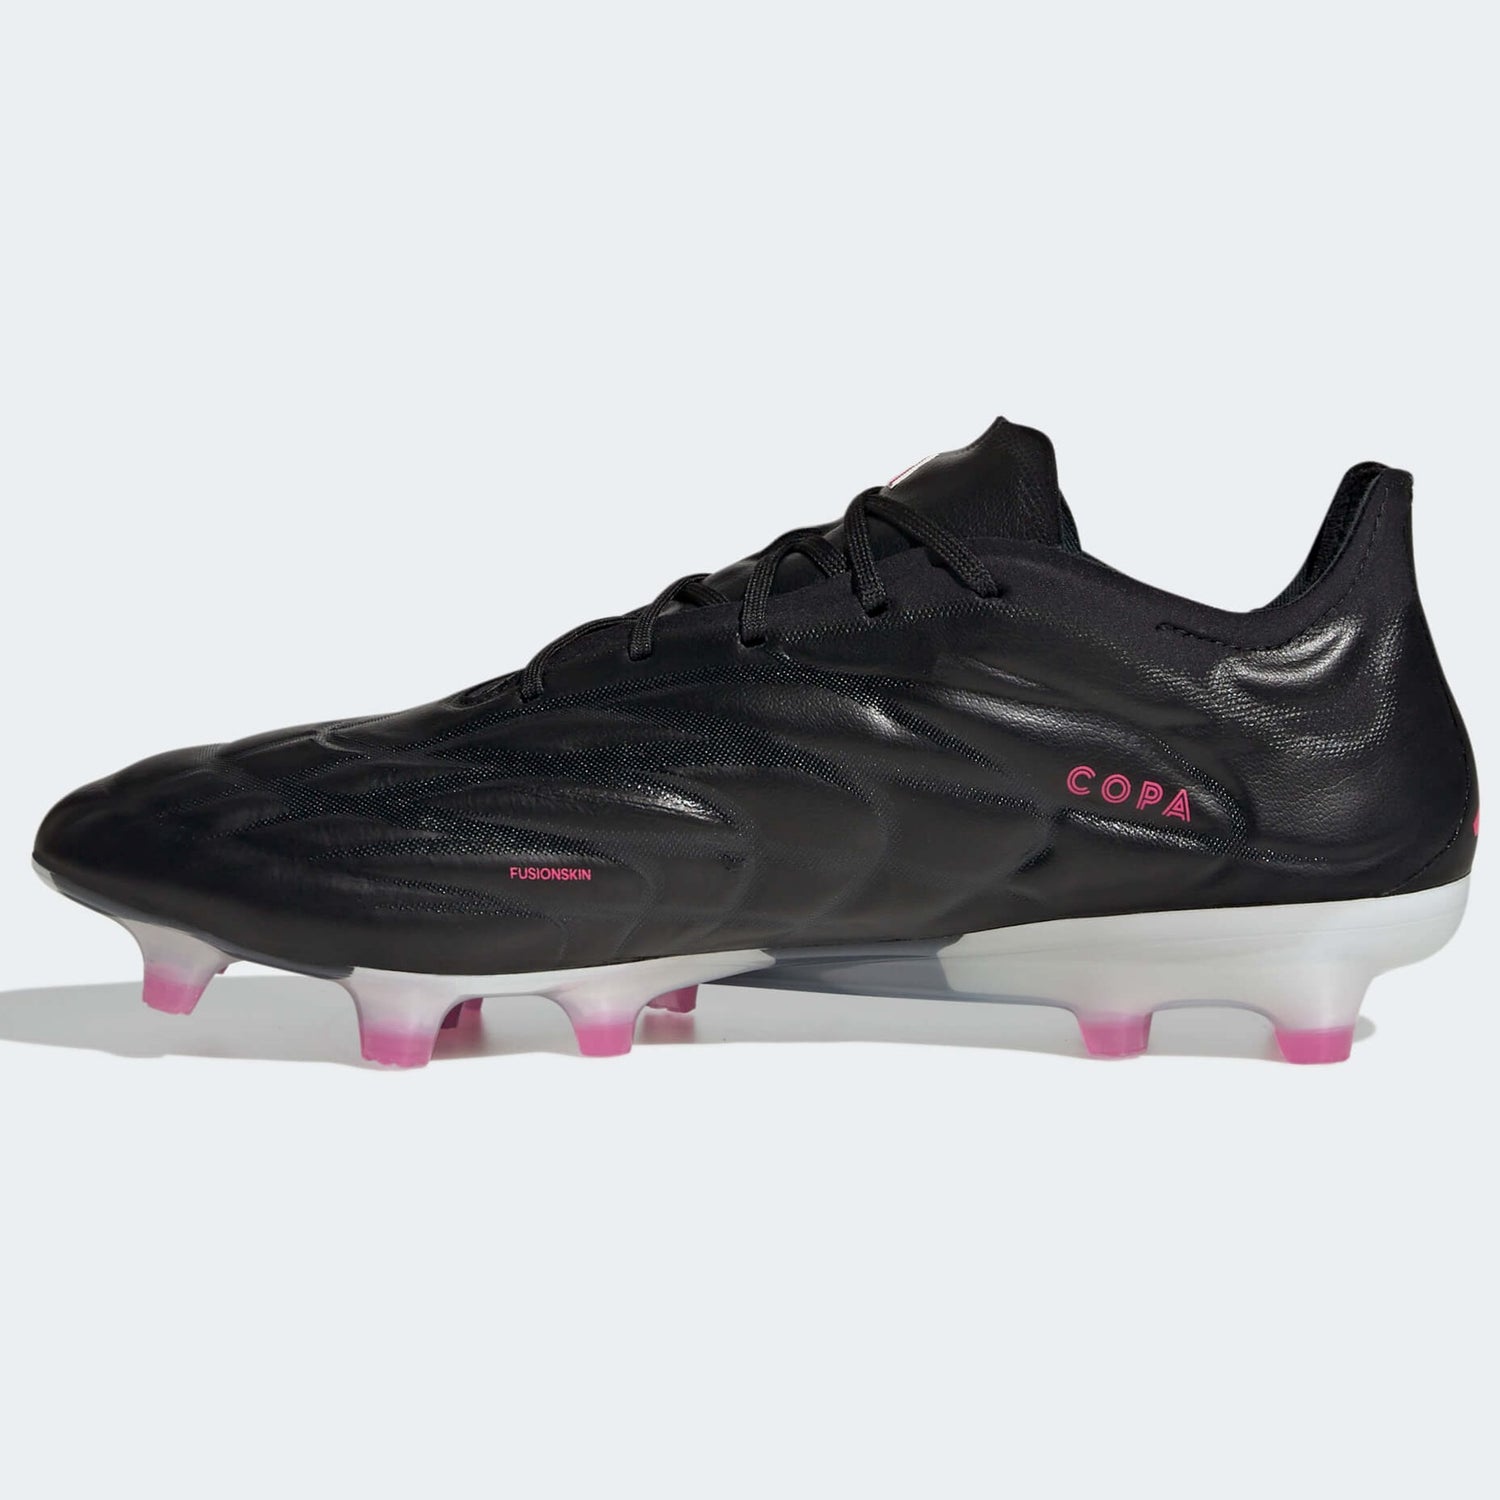 adidas Copa Pure.1 FG - Own Your Football Pack (SP23) (Side 2)